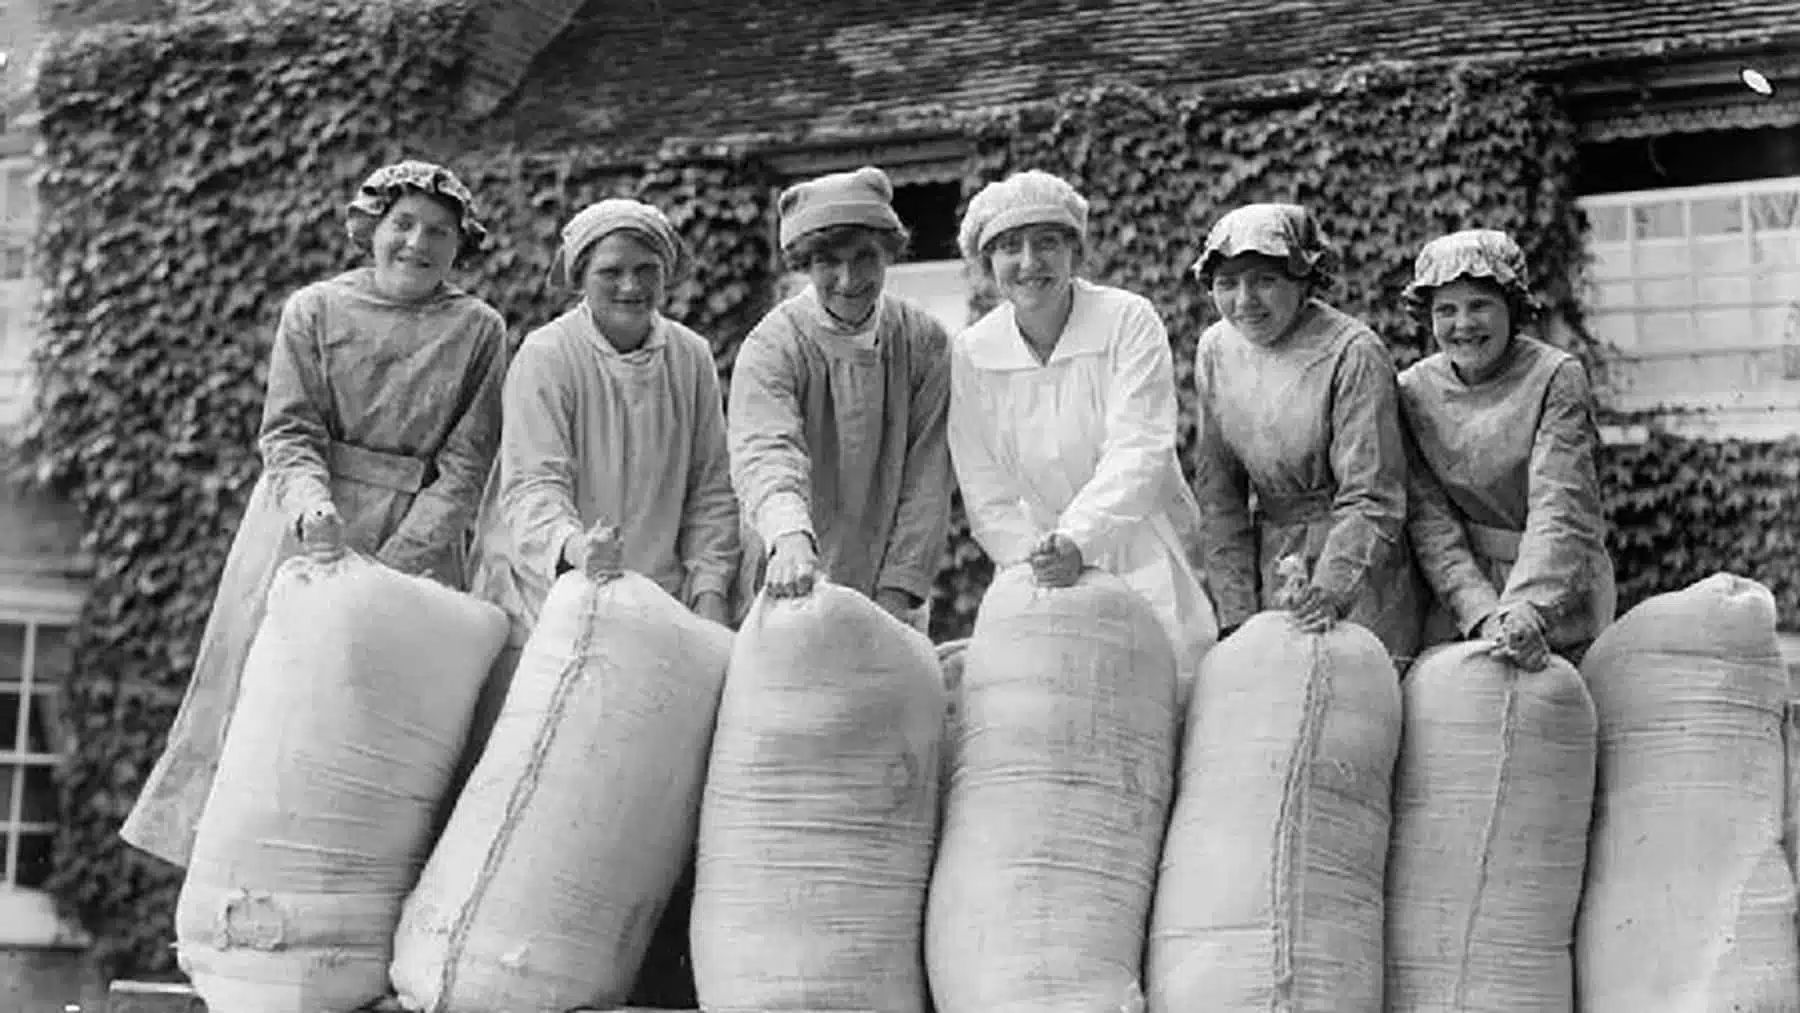 Women workers with flour sacks at British mill during the First World War (Wikimedia)